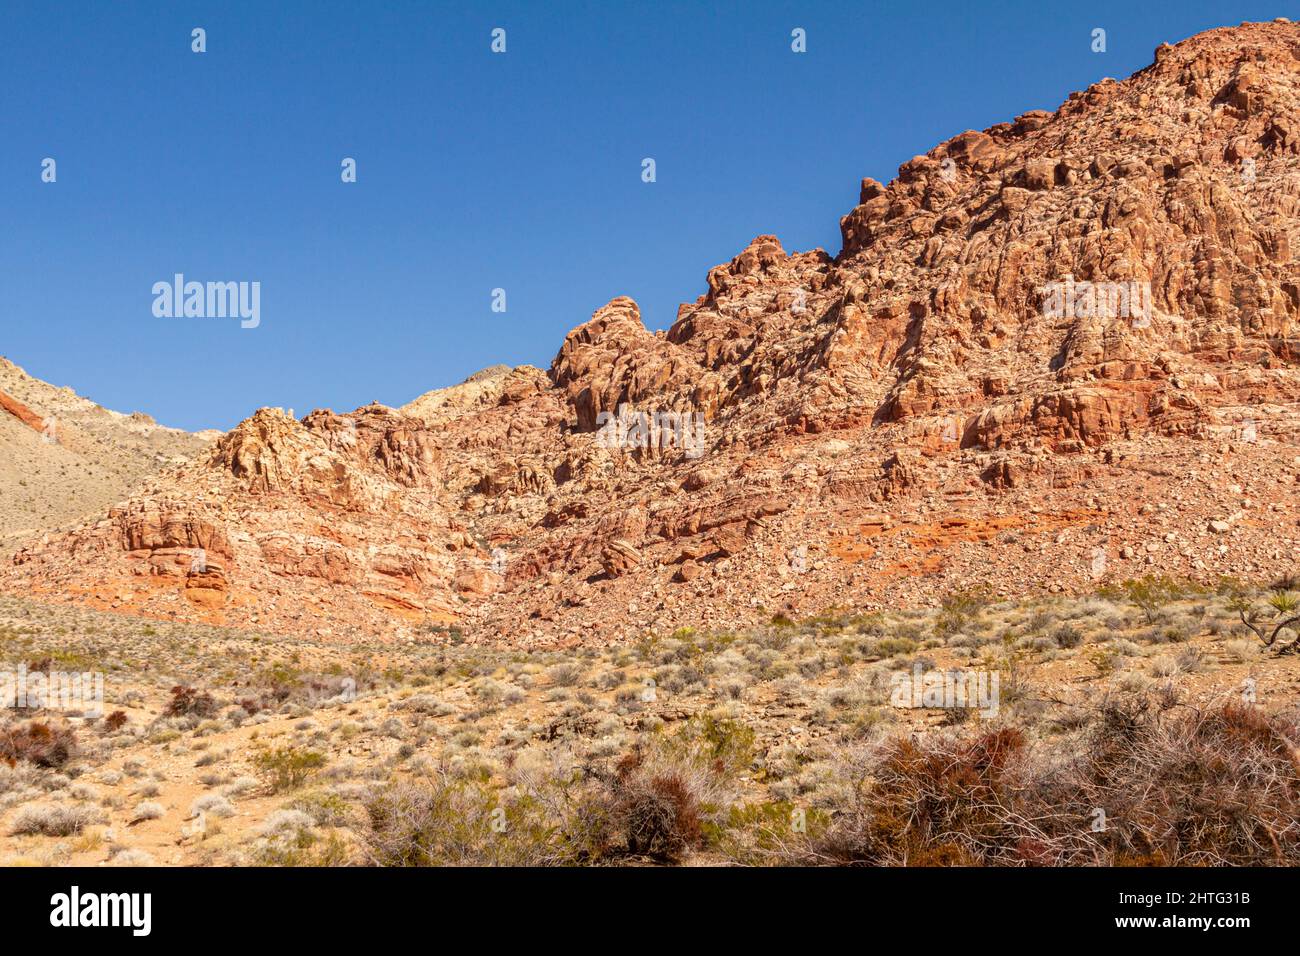 Mountain landscape at the Red Rock Canyon National Conservation Area in Nevada Stock Photo